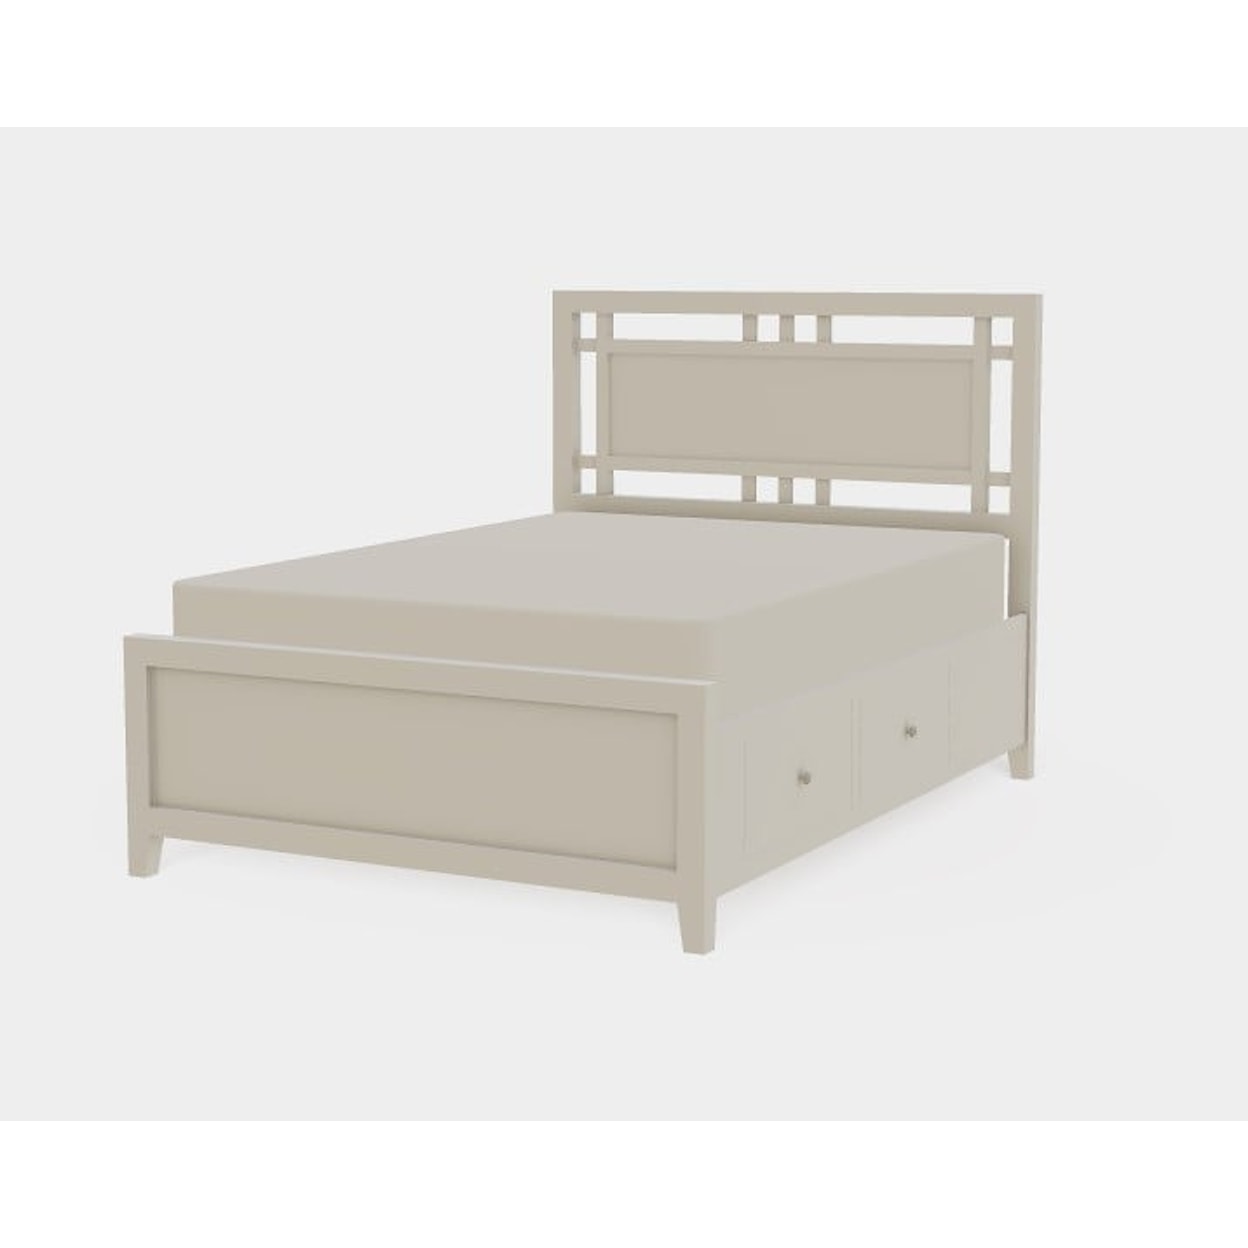 Mavin Atwood Group Atwood Full Both Drawerside Gridwork Bed